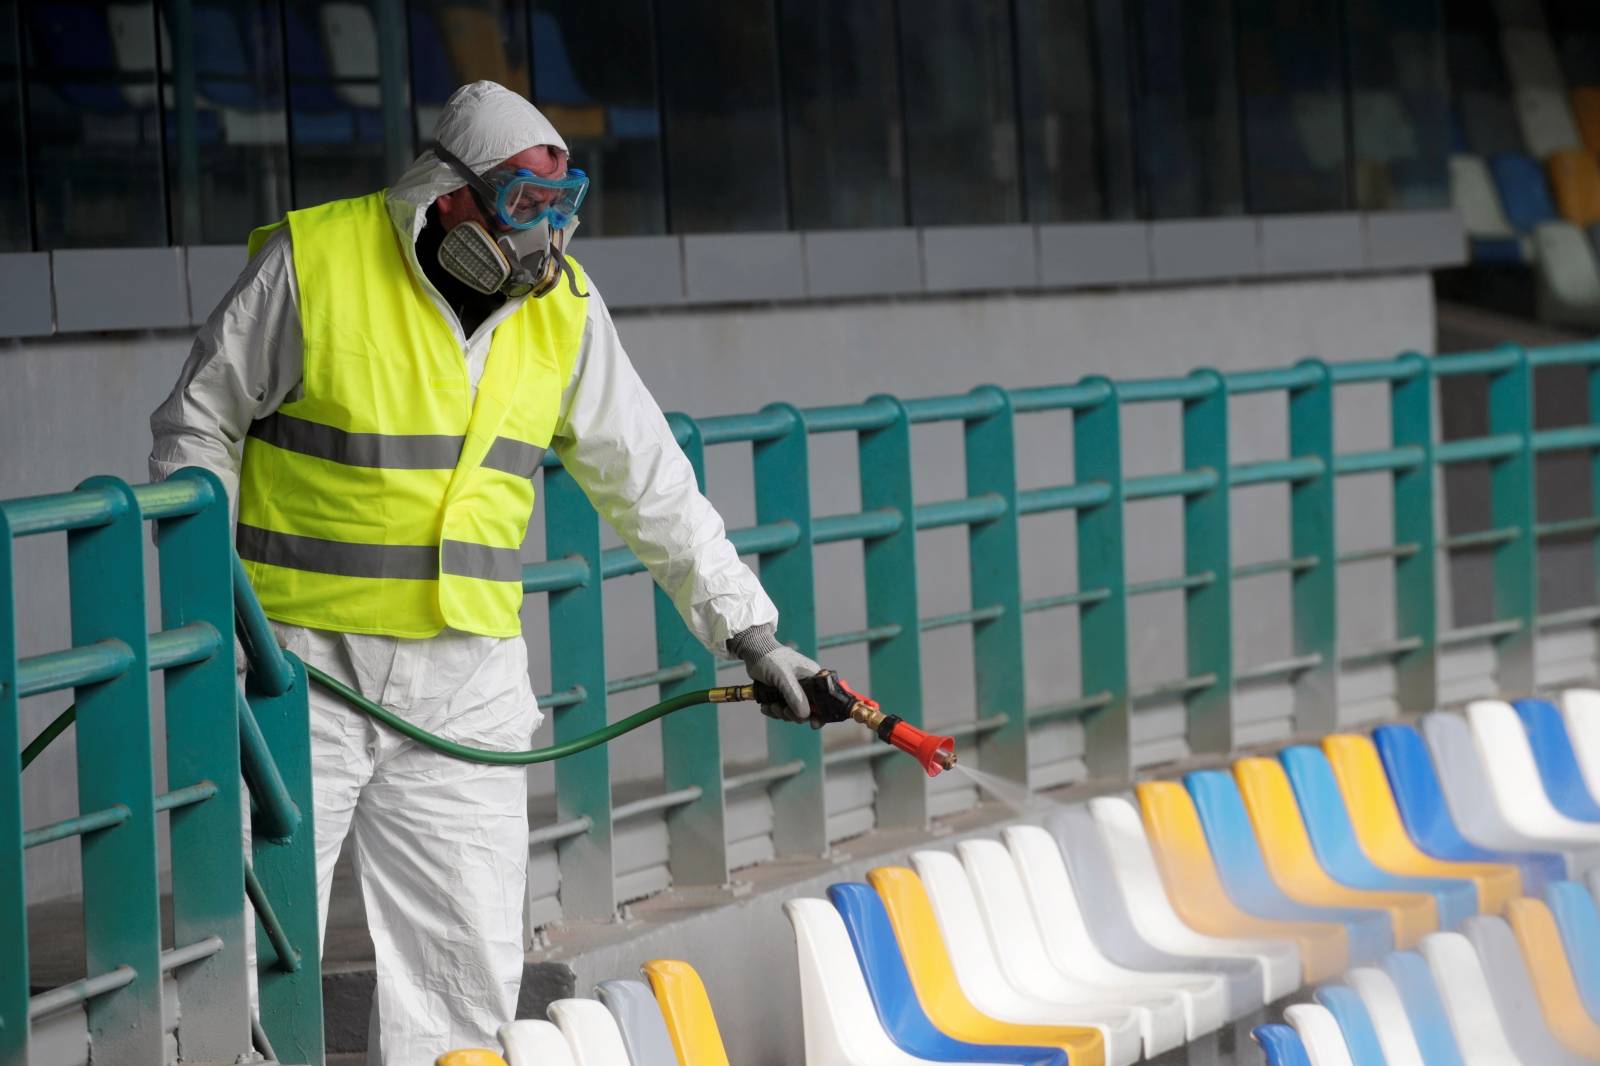 A cleaner wearing a protective suit sanitises seats at the San Paolo stadium ahead of the second leg of the Coppa Italia semi-final between Napoli and Inter Milan, which has since been postponed